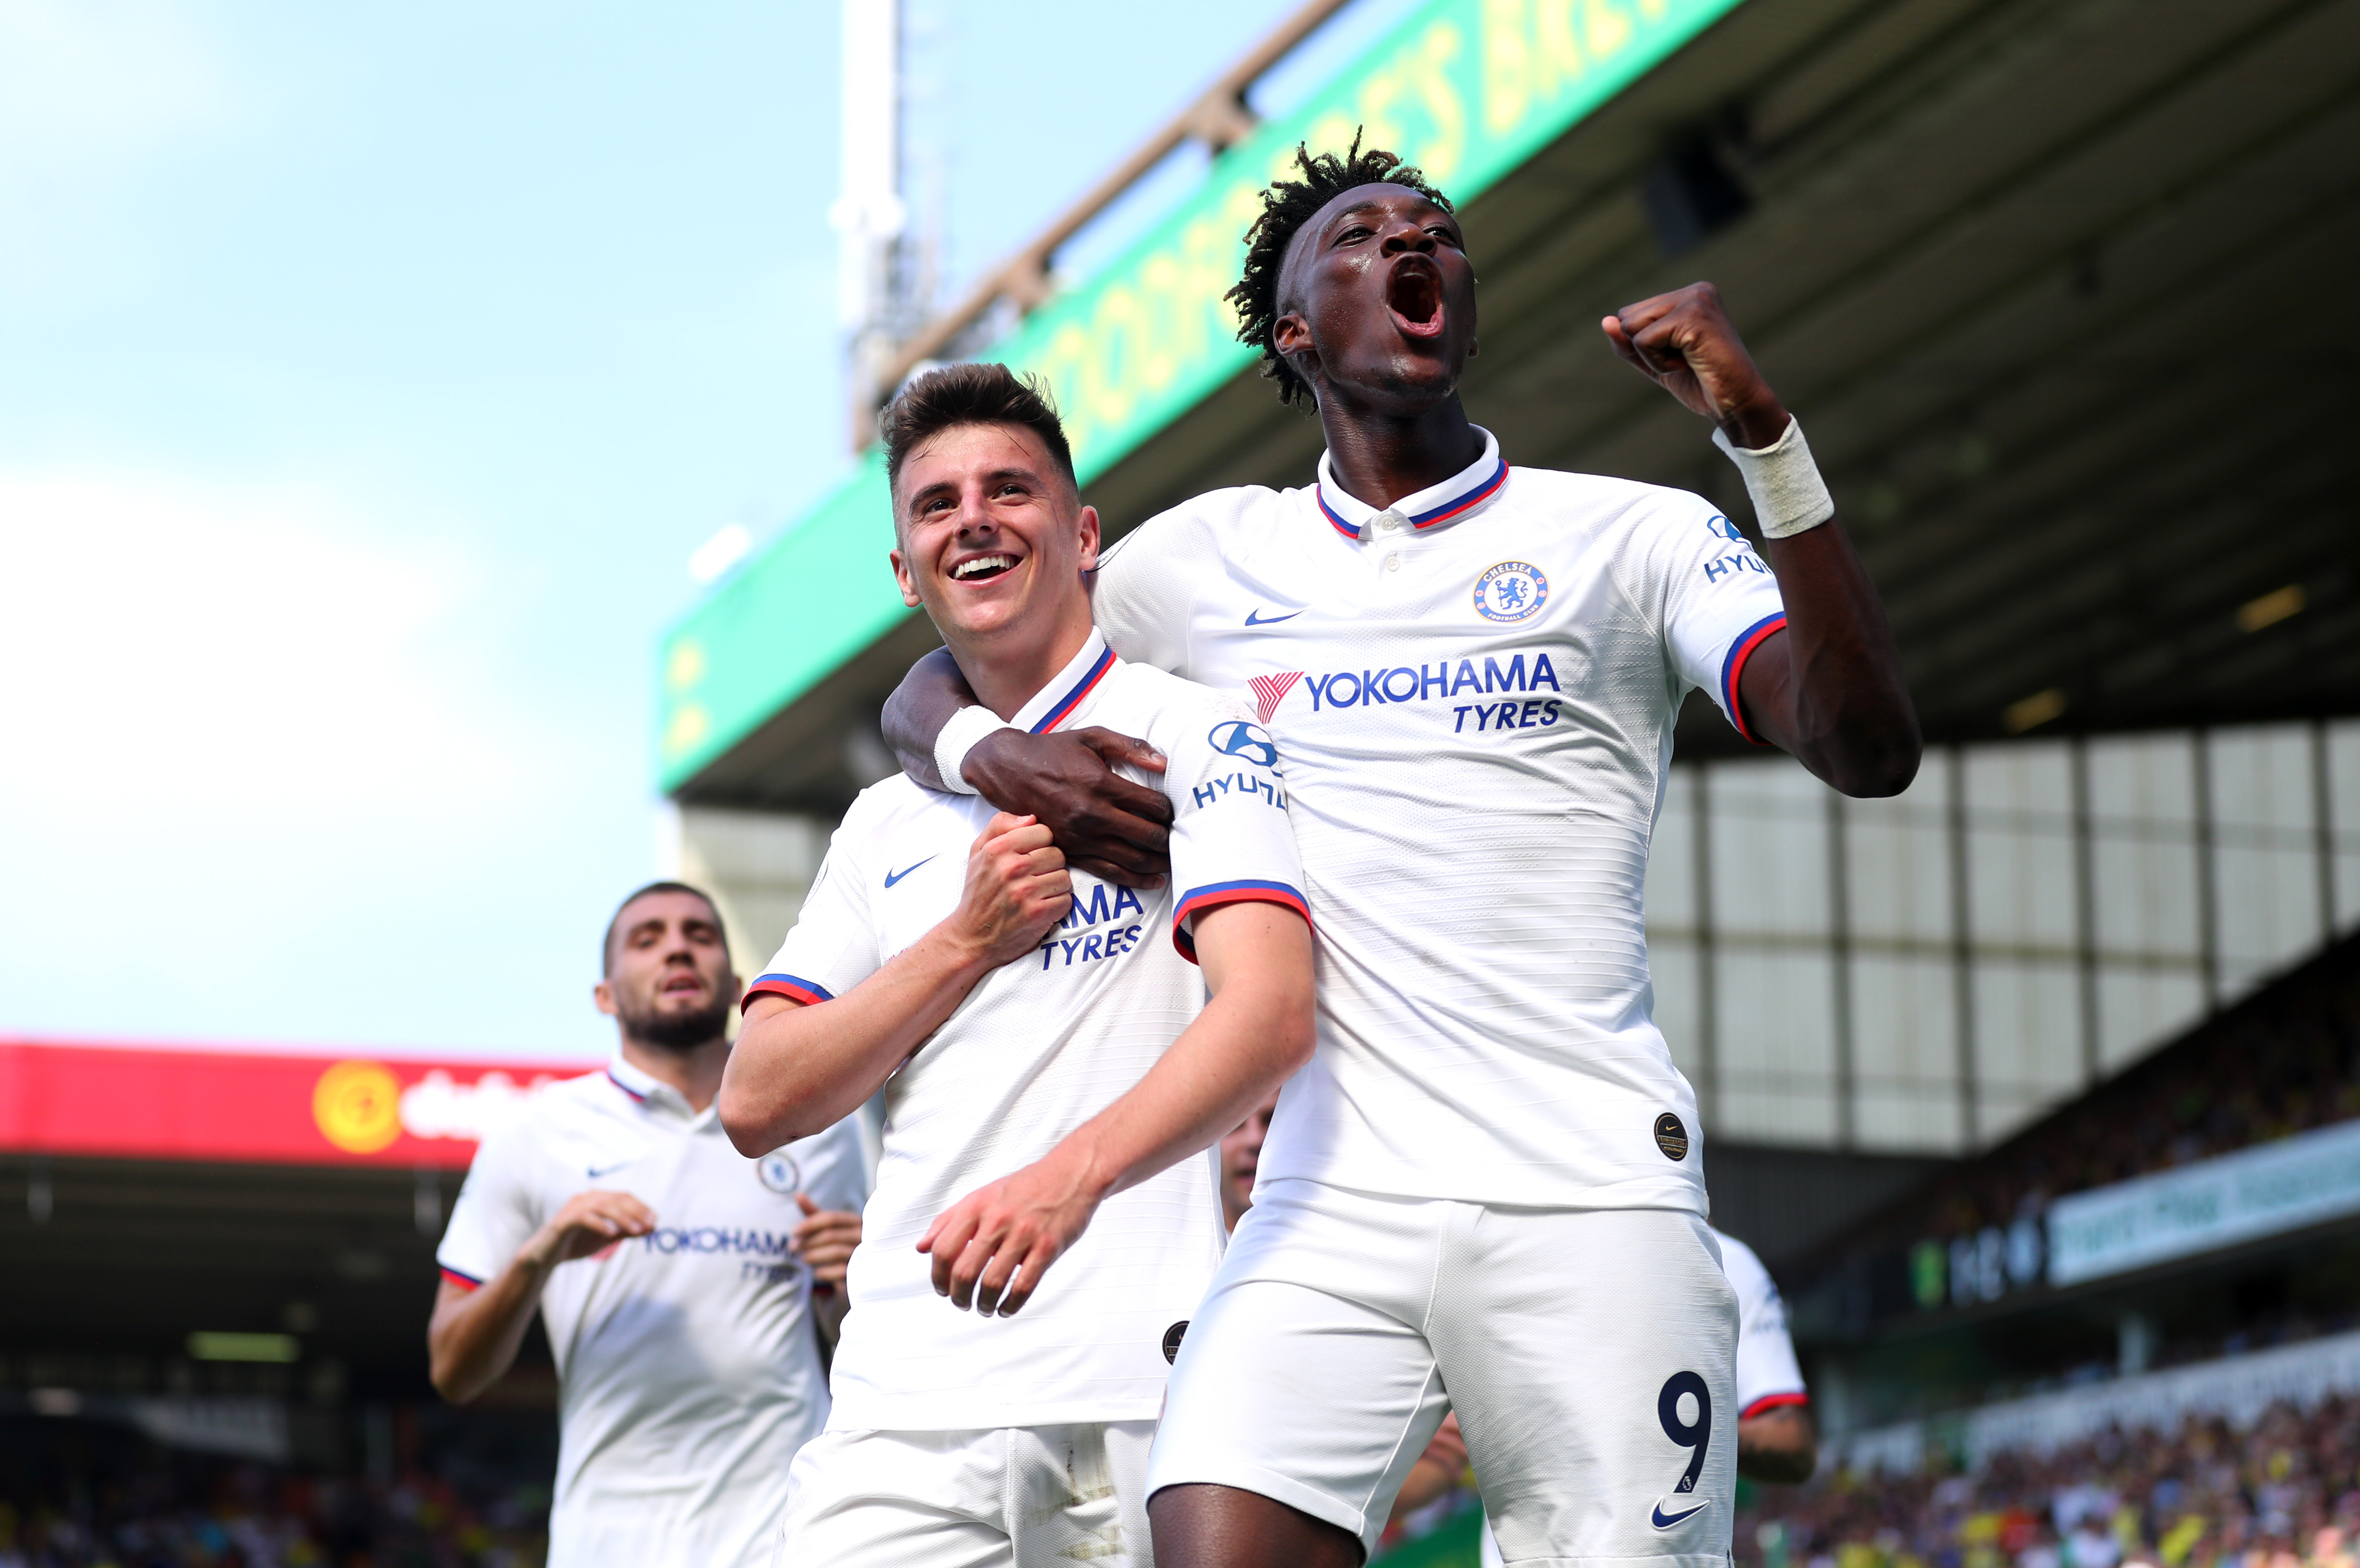 NORWICH, ENGLAND - AUGUST 24: Mason Mount and Tammy Abraham of Chelsea celebrates after scoring their team's second goal during the Premier League match between Norwich City and Chelsea FC at Carrow Road on August 24, 2019 in Norwich, United Kingdom. (Photo by Catherine Ivill/Getty Images)